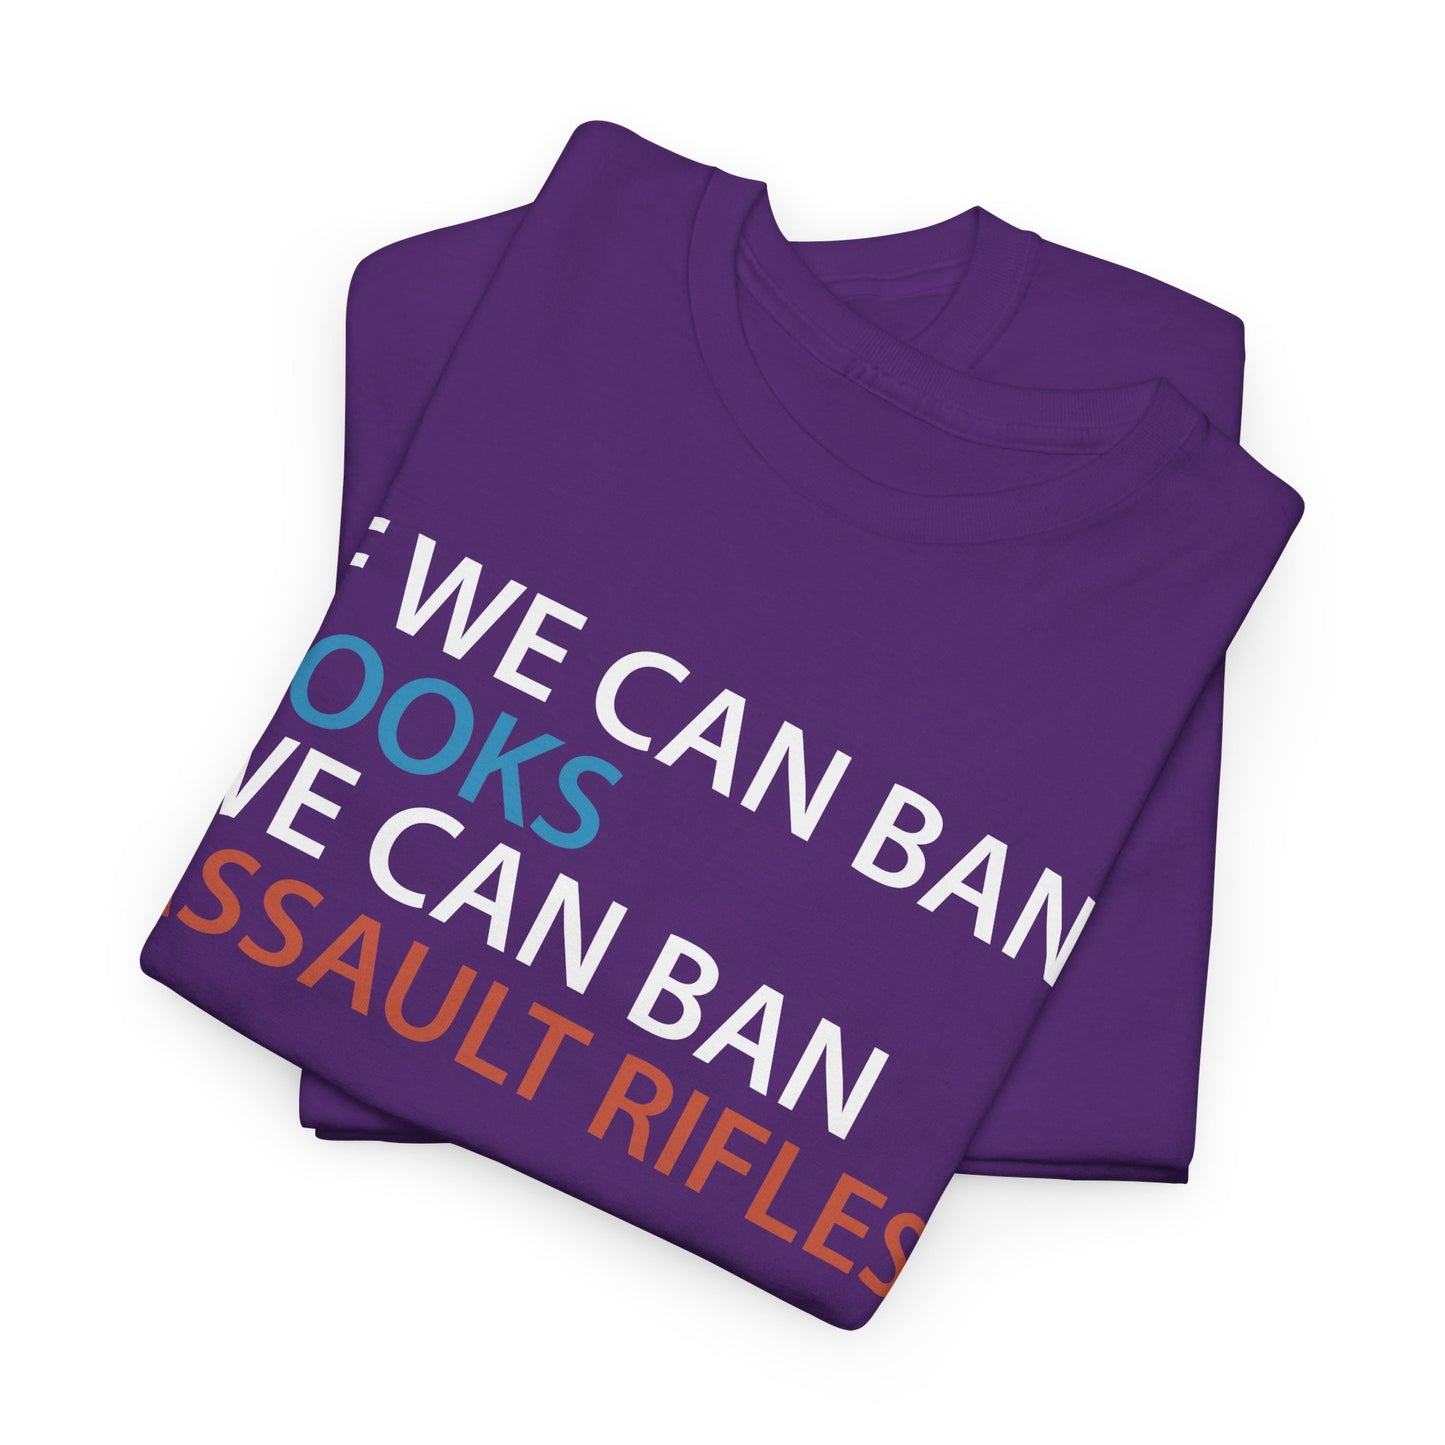 If We Can Ban Books We Can Ban Assault Rifes Tee